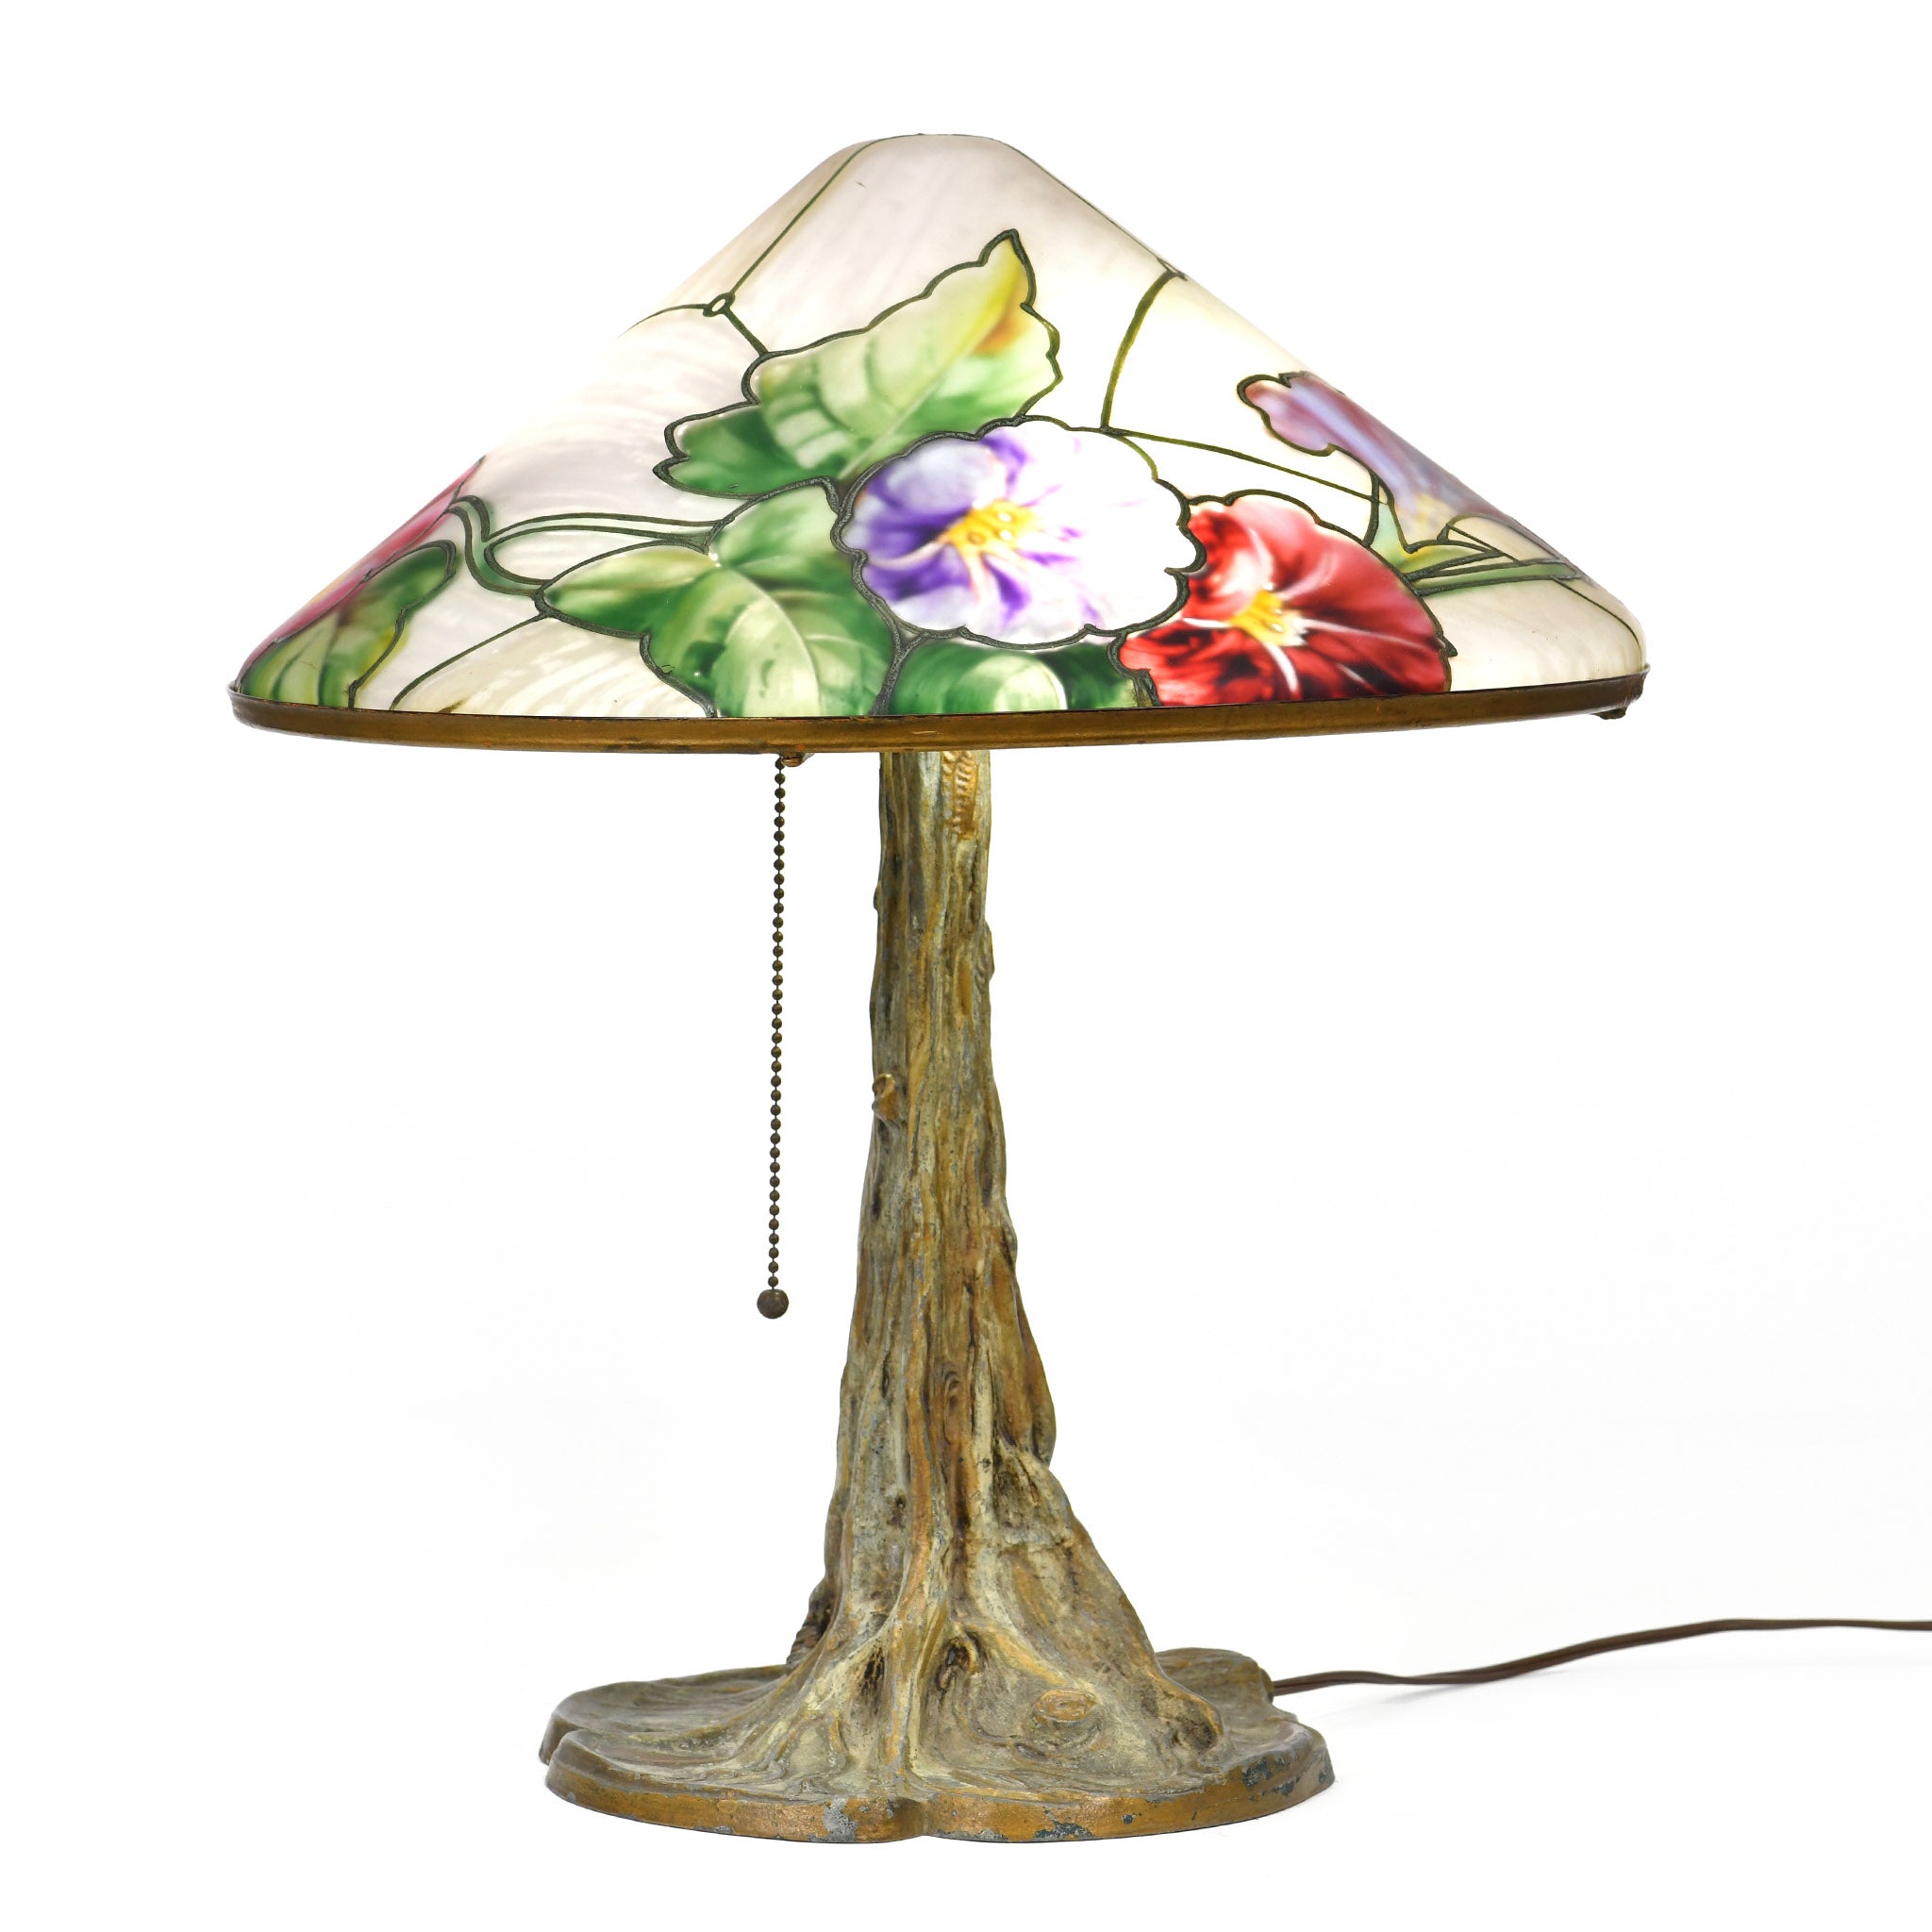 Pairpoint Lamp: A 1915 Artistic Masterpiece